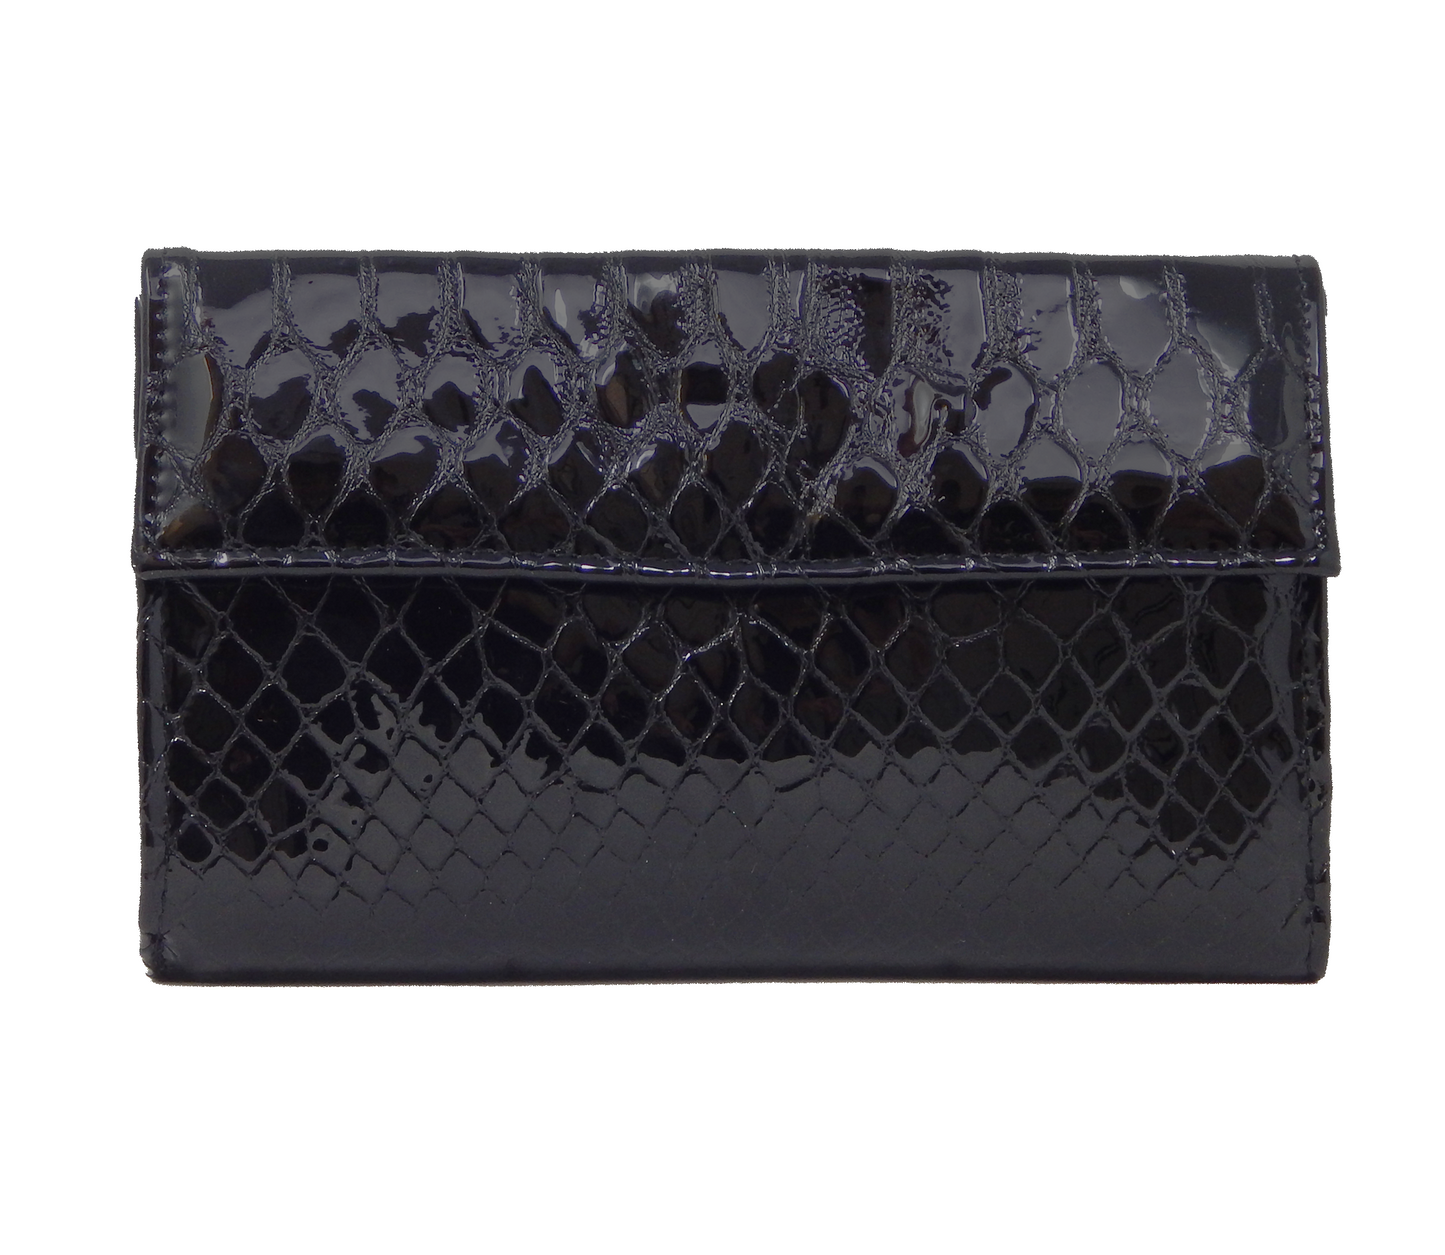 Cavalinho Galope Patent Leather Wallet - Black - 28170207.01_3_6d17be93-4bae-4f06-bc6b-1aae6f6a5f27